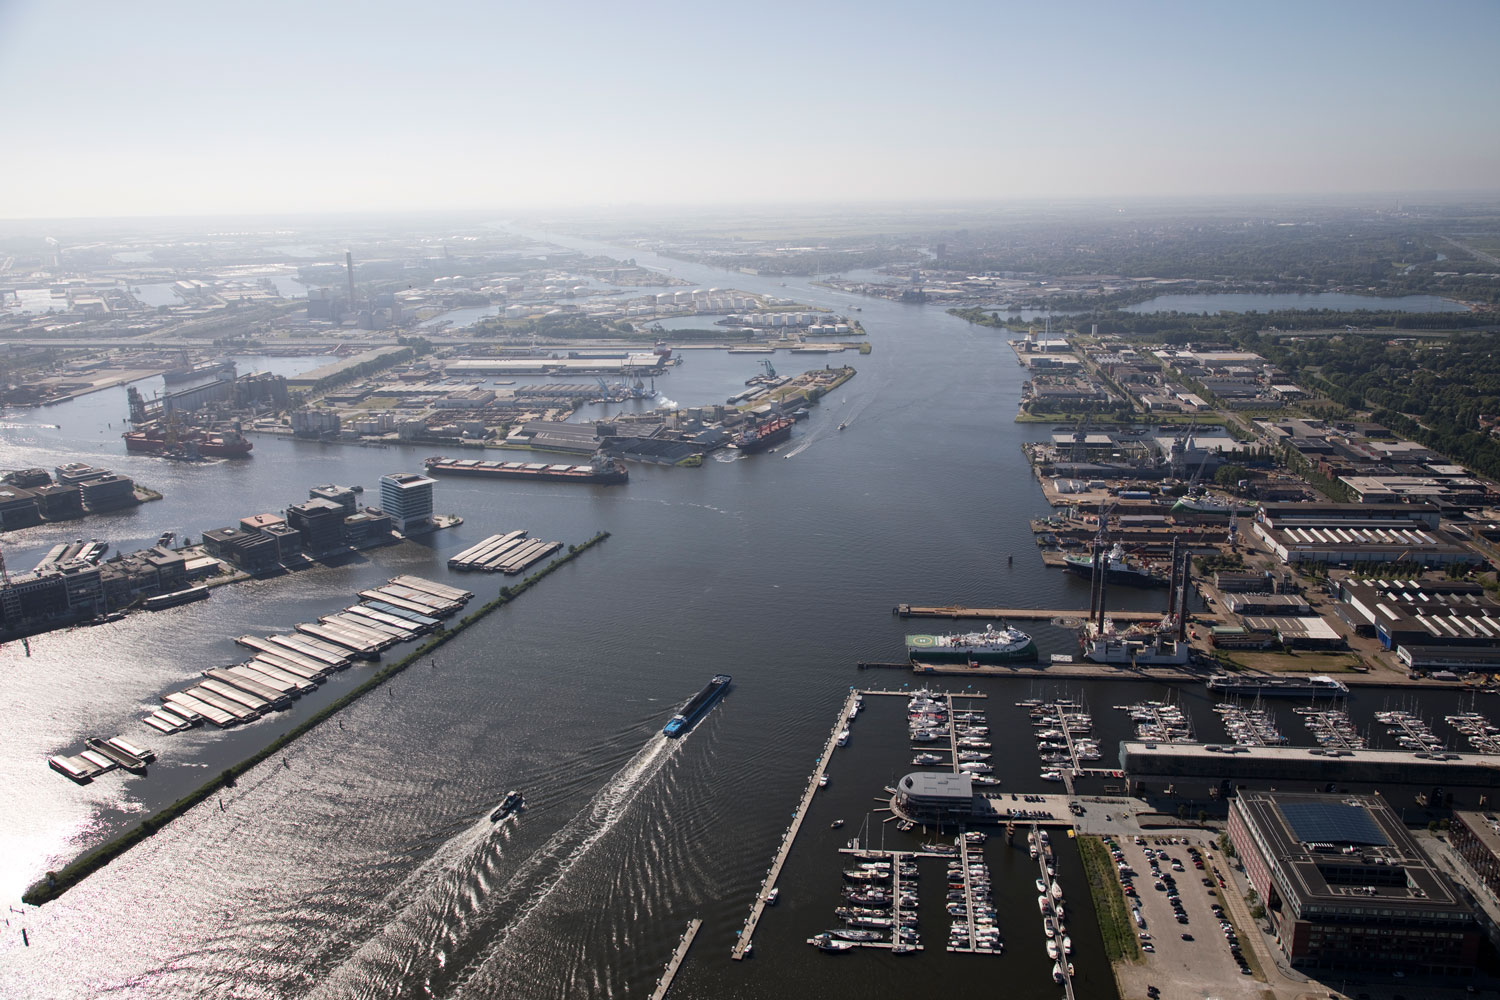 An aerial image of the port of Amsterdam